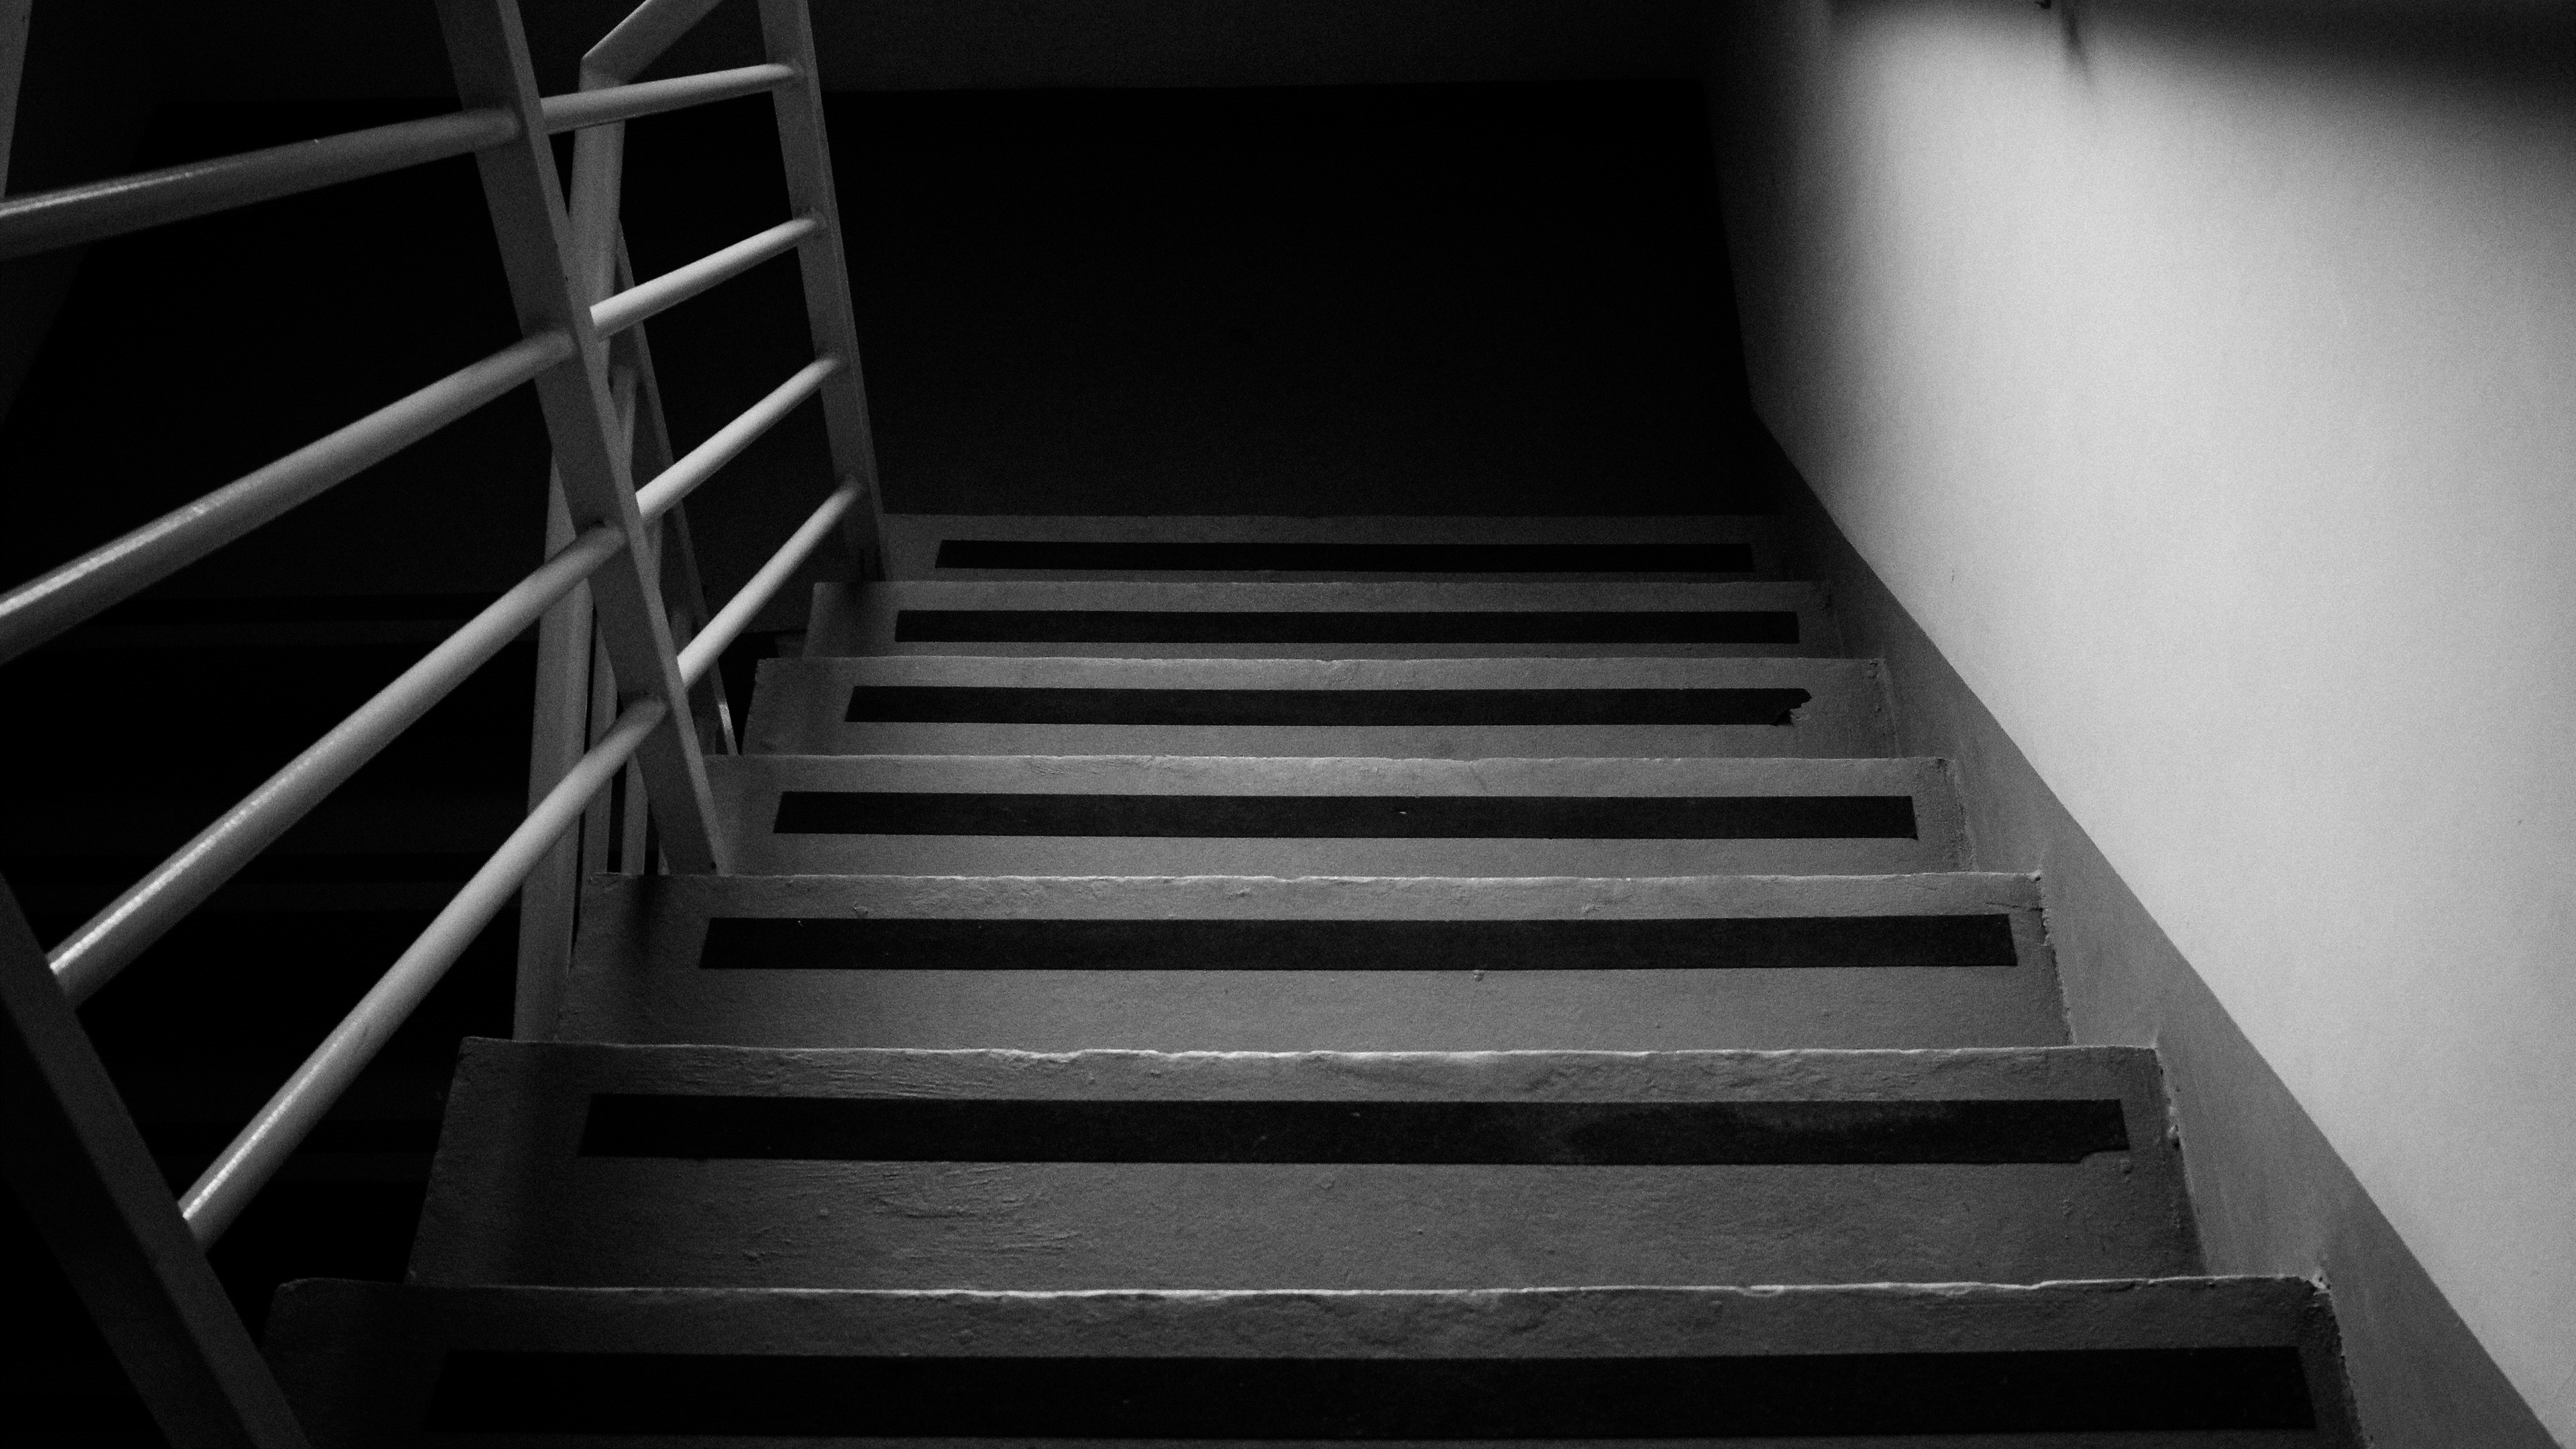 Wallpaper Ladder, black and white picture 5120x2880 UHD 5K Picture, Image